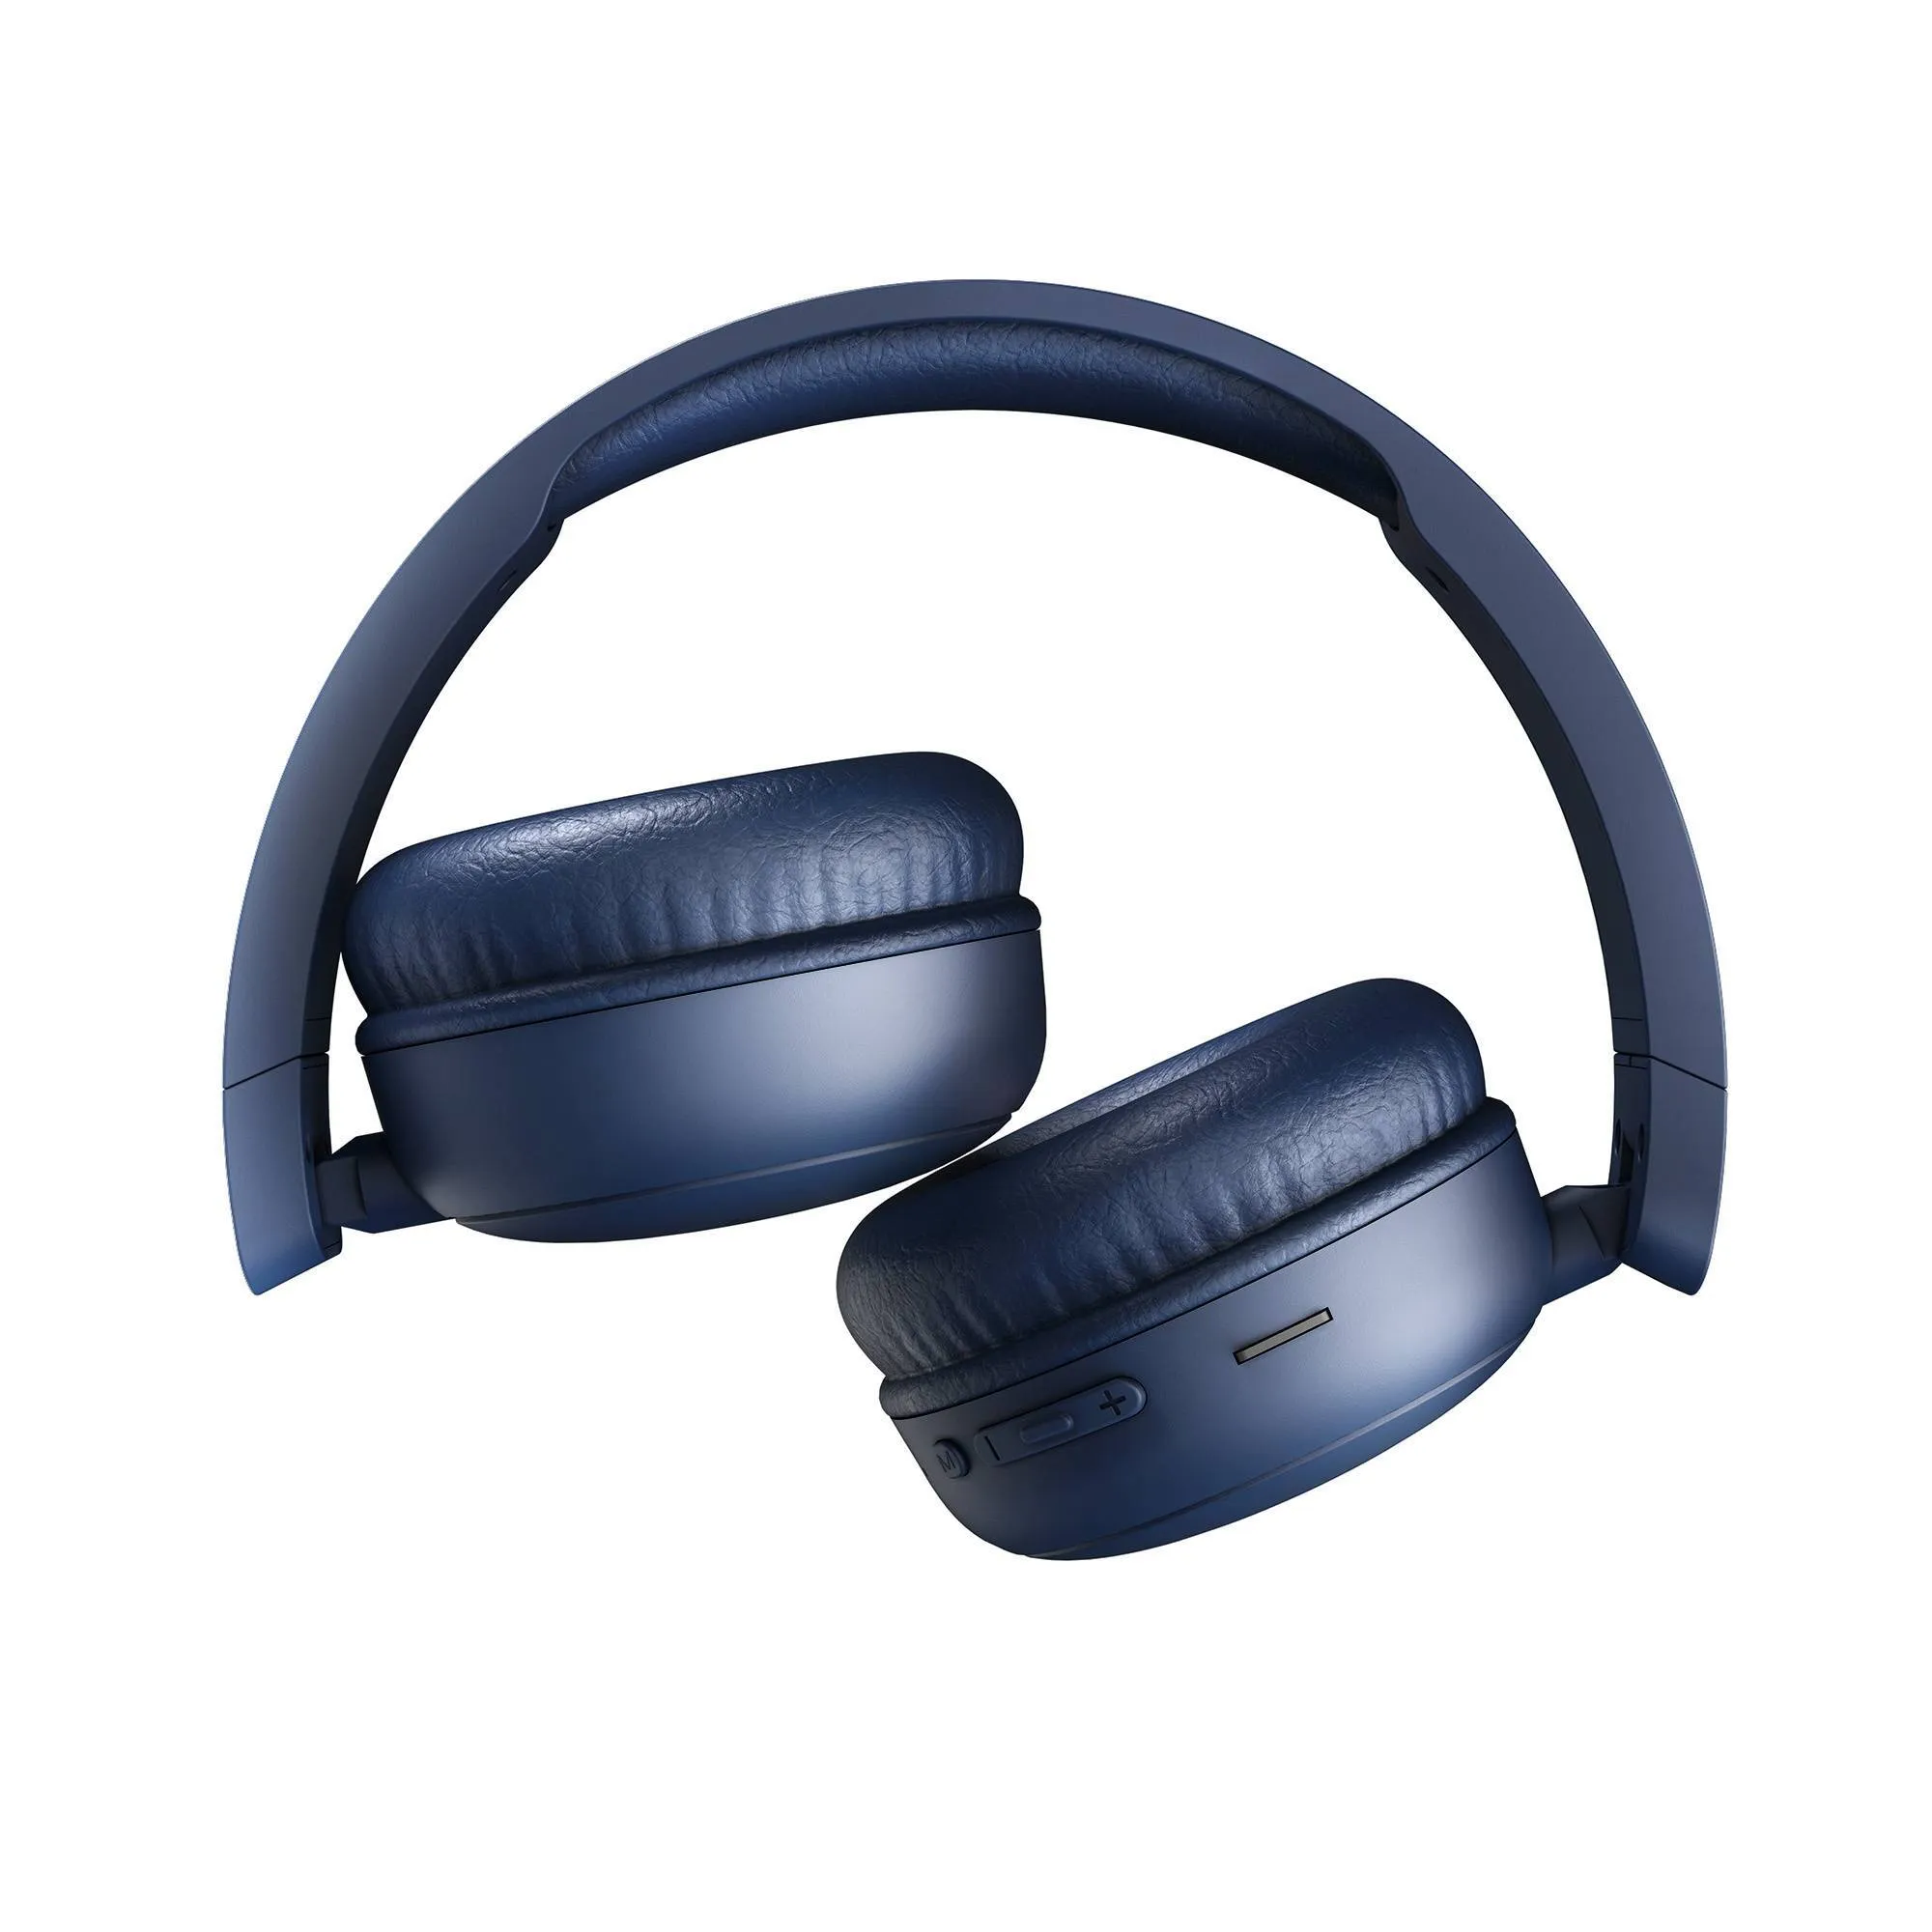 Radio Color indigo adjustable headphones with folding system for greater convenience.